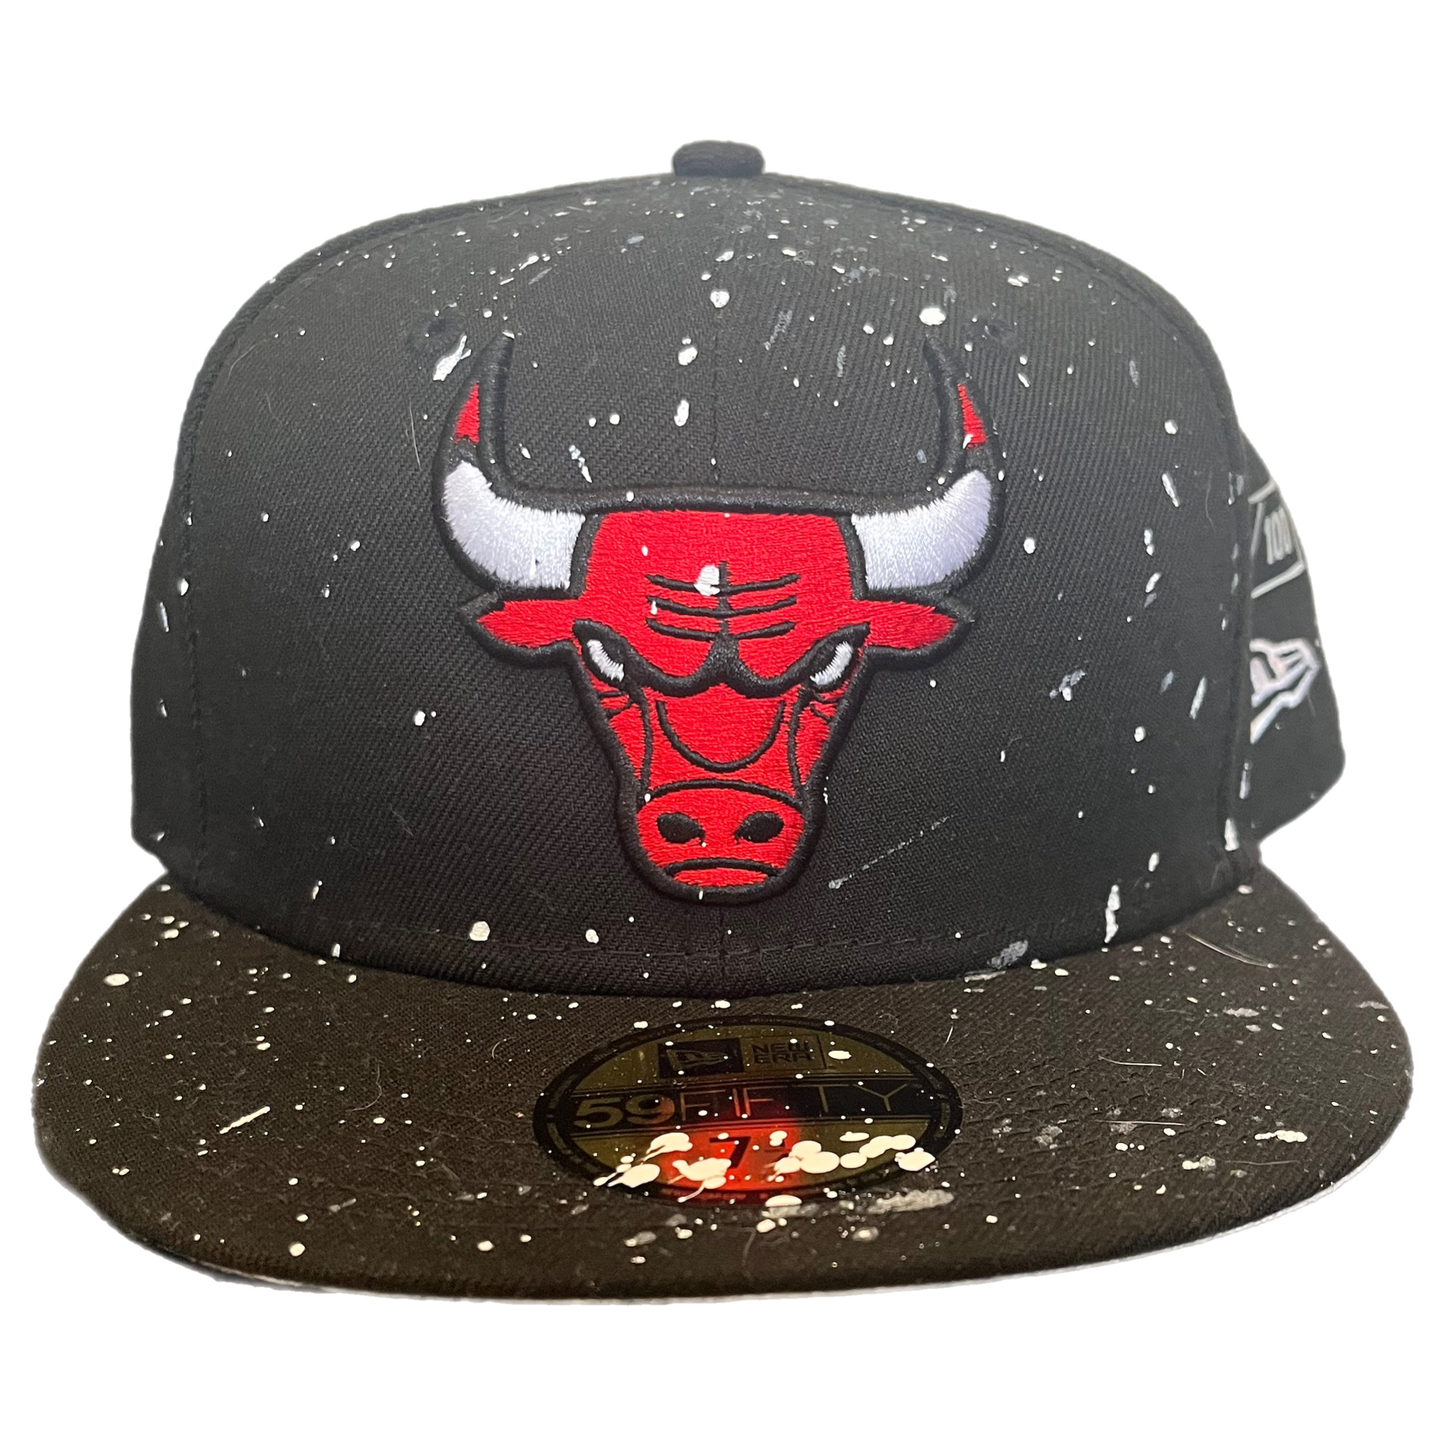 Joshua Vides Chicago Bulls Fitted Hat 7" 1/4